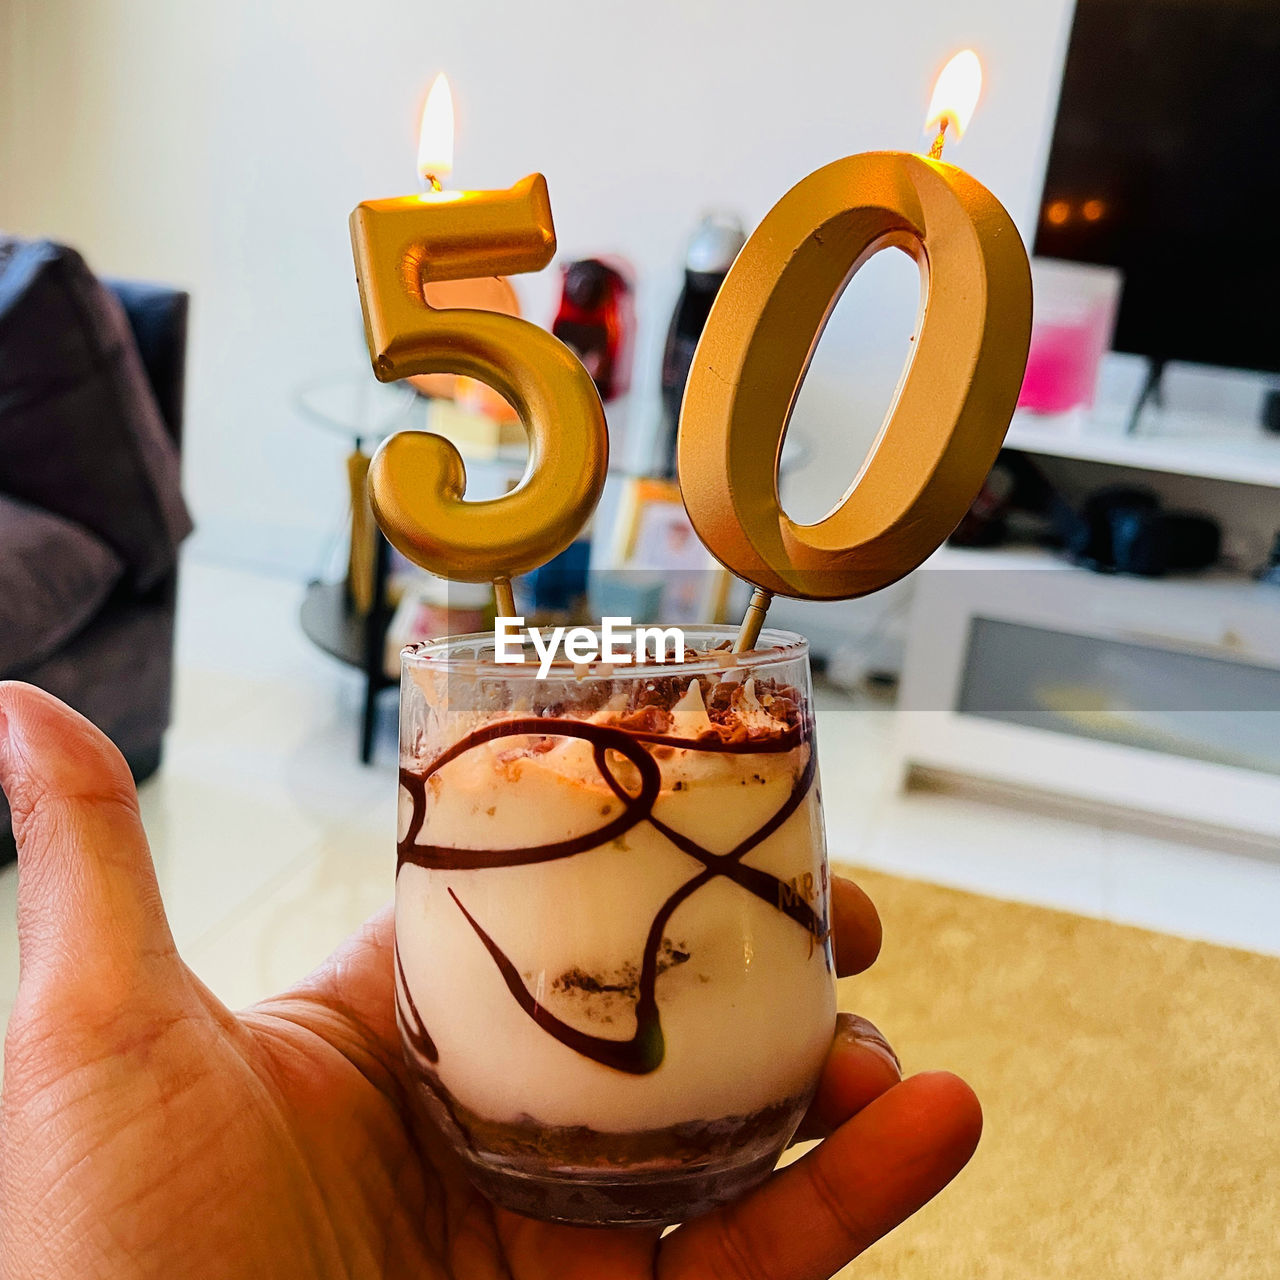 hand, one person, holding, indoors, food and drink, food, dessert, candle, adult, yellow, lifestyles, art, business, cake, cartoon, focus on foreground, table